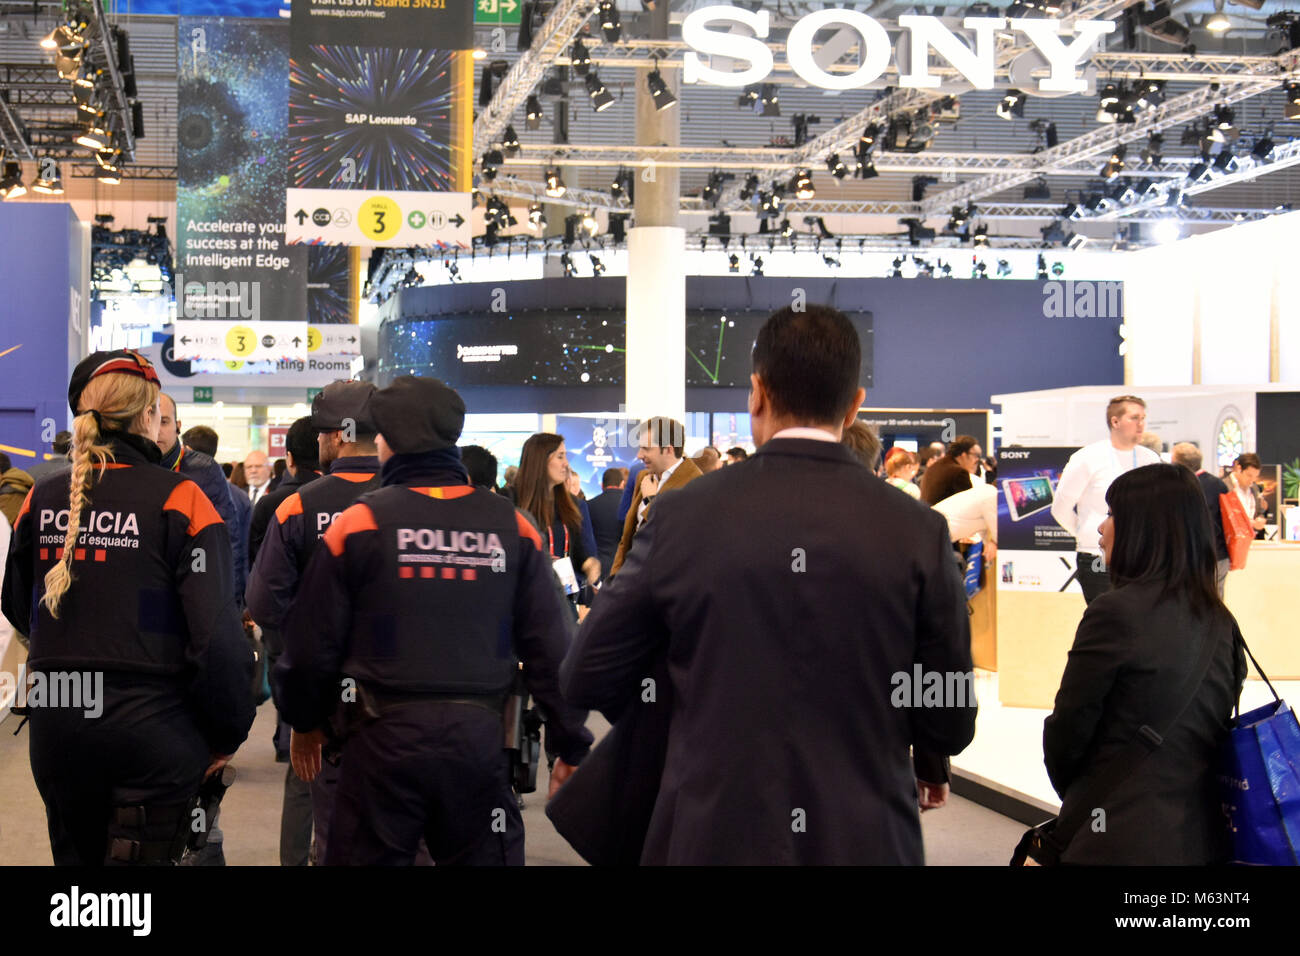 Barcelona, Spain. 28th Feb, 2018. Catalan police seen walking past the SONY stand at the Mobile World Congress.The Mobile World Congress 2018 is being hosted in Barcelona from 26 February to 1st March. Credit: Third day at Mobile Word Congress in Barcelona Ramon Costa  11 .jpg/SOPA Images/ZUMA Wire/Alamy Live News Stock Photo